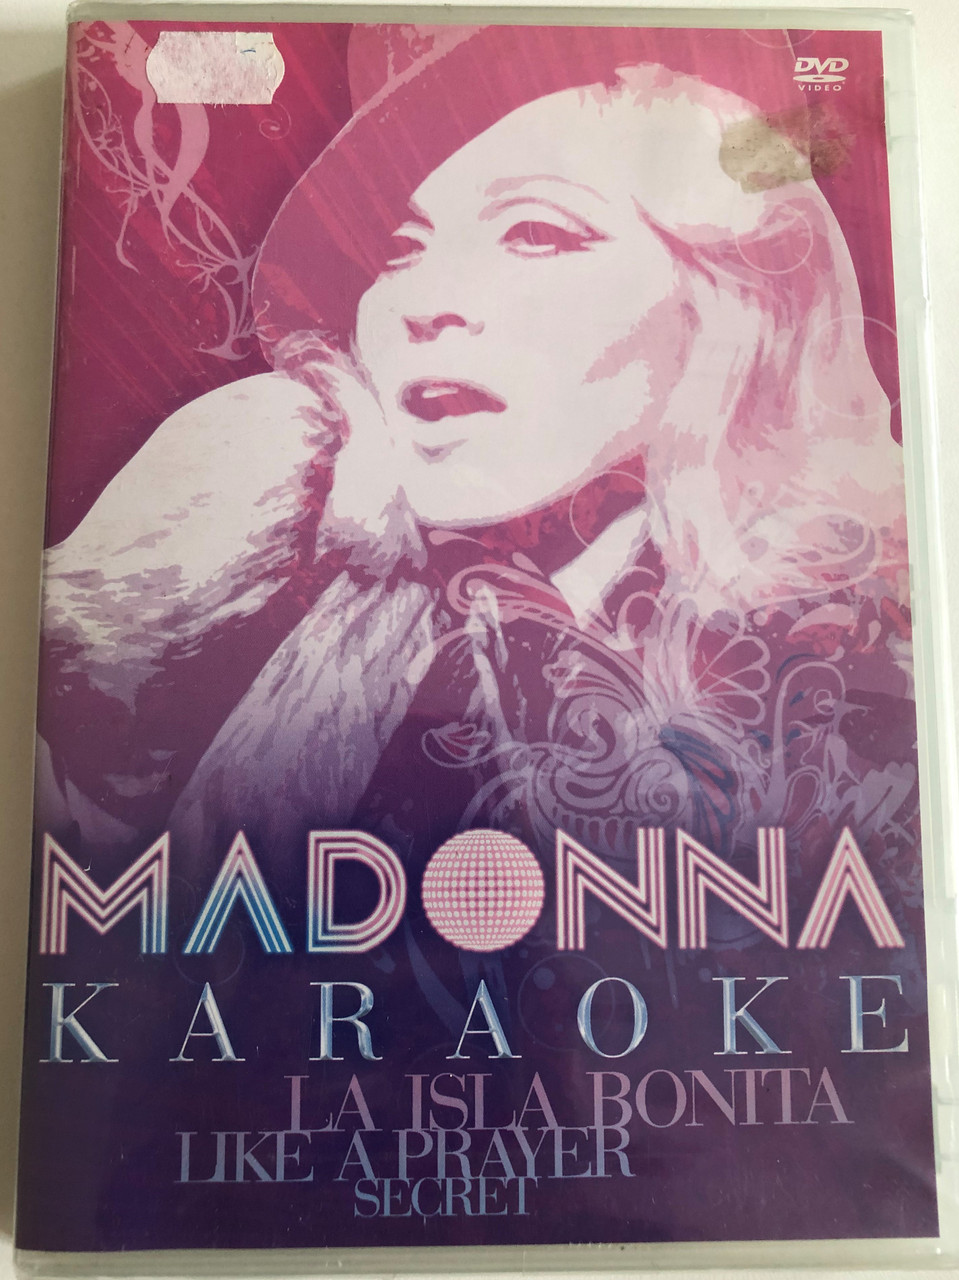 MADONNA_-_KARAOKE_SING_THE_GREATEST_HITS_Special_setting_options_Original_song_with_English_vocals_Song_in_original_pitch_using_a_melody_Song_3_semitones_higher_1__25378.1692348237.1280.1280.JPG (959×1280)